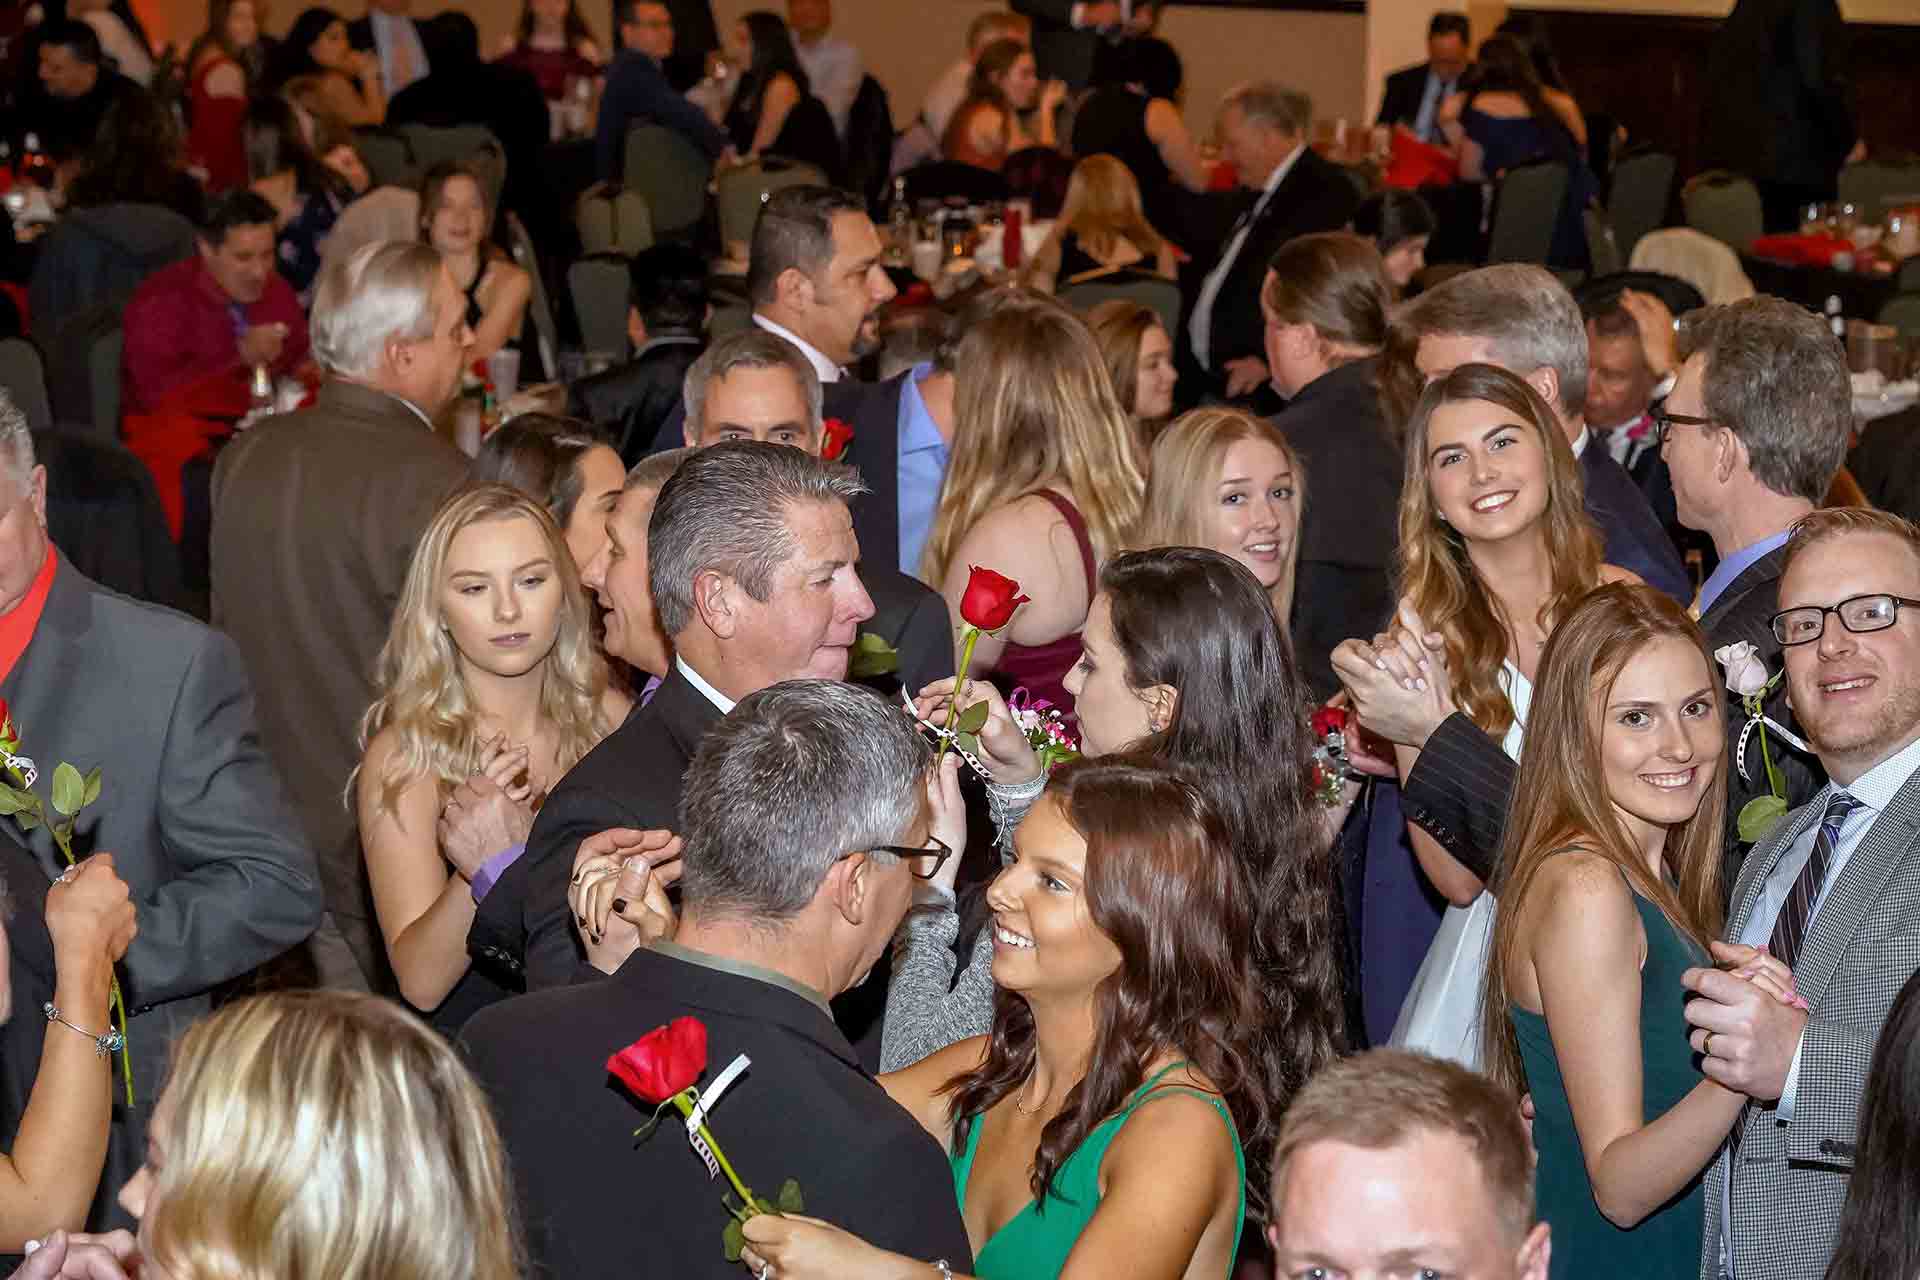 father-daughter-dance-2019-crowd-of-people-dancing